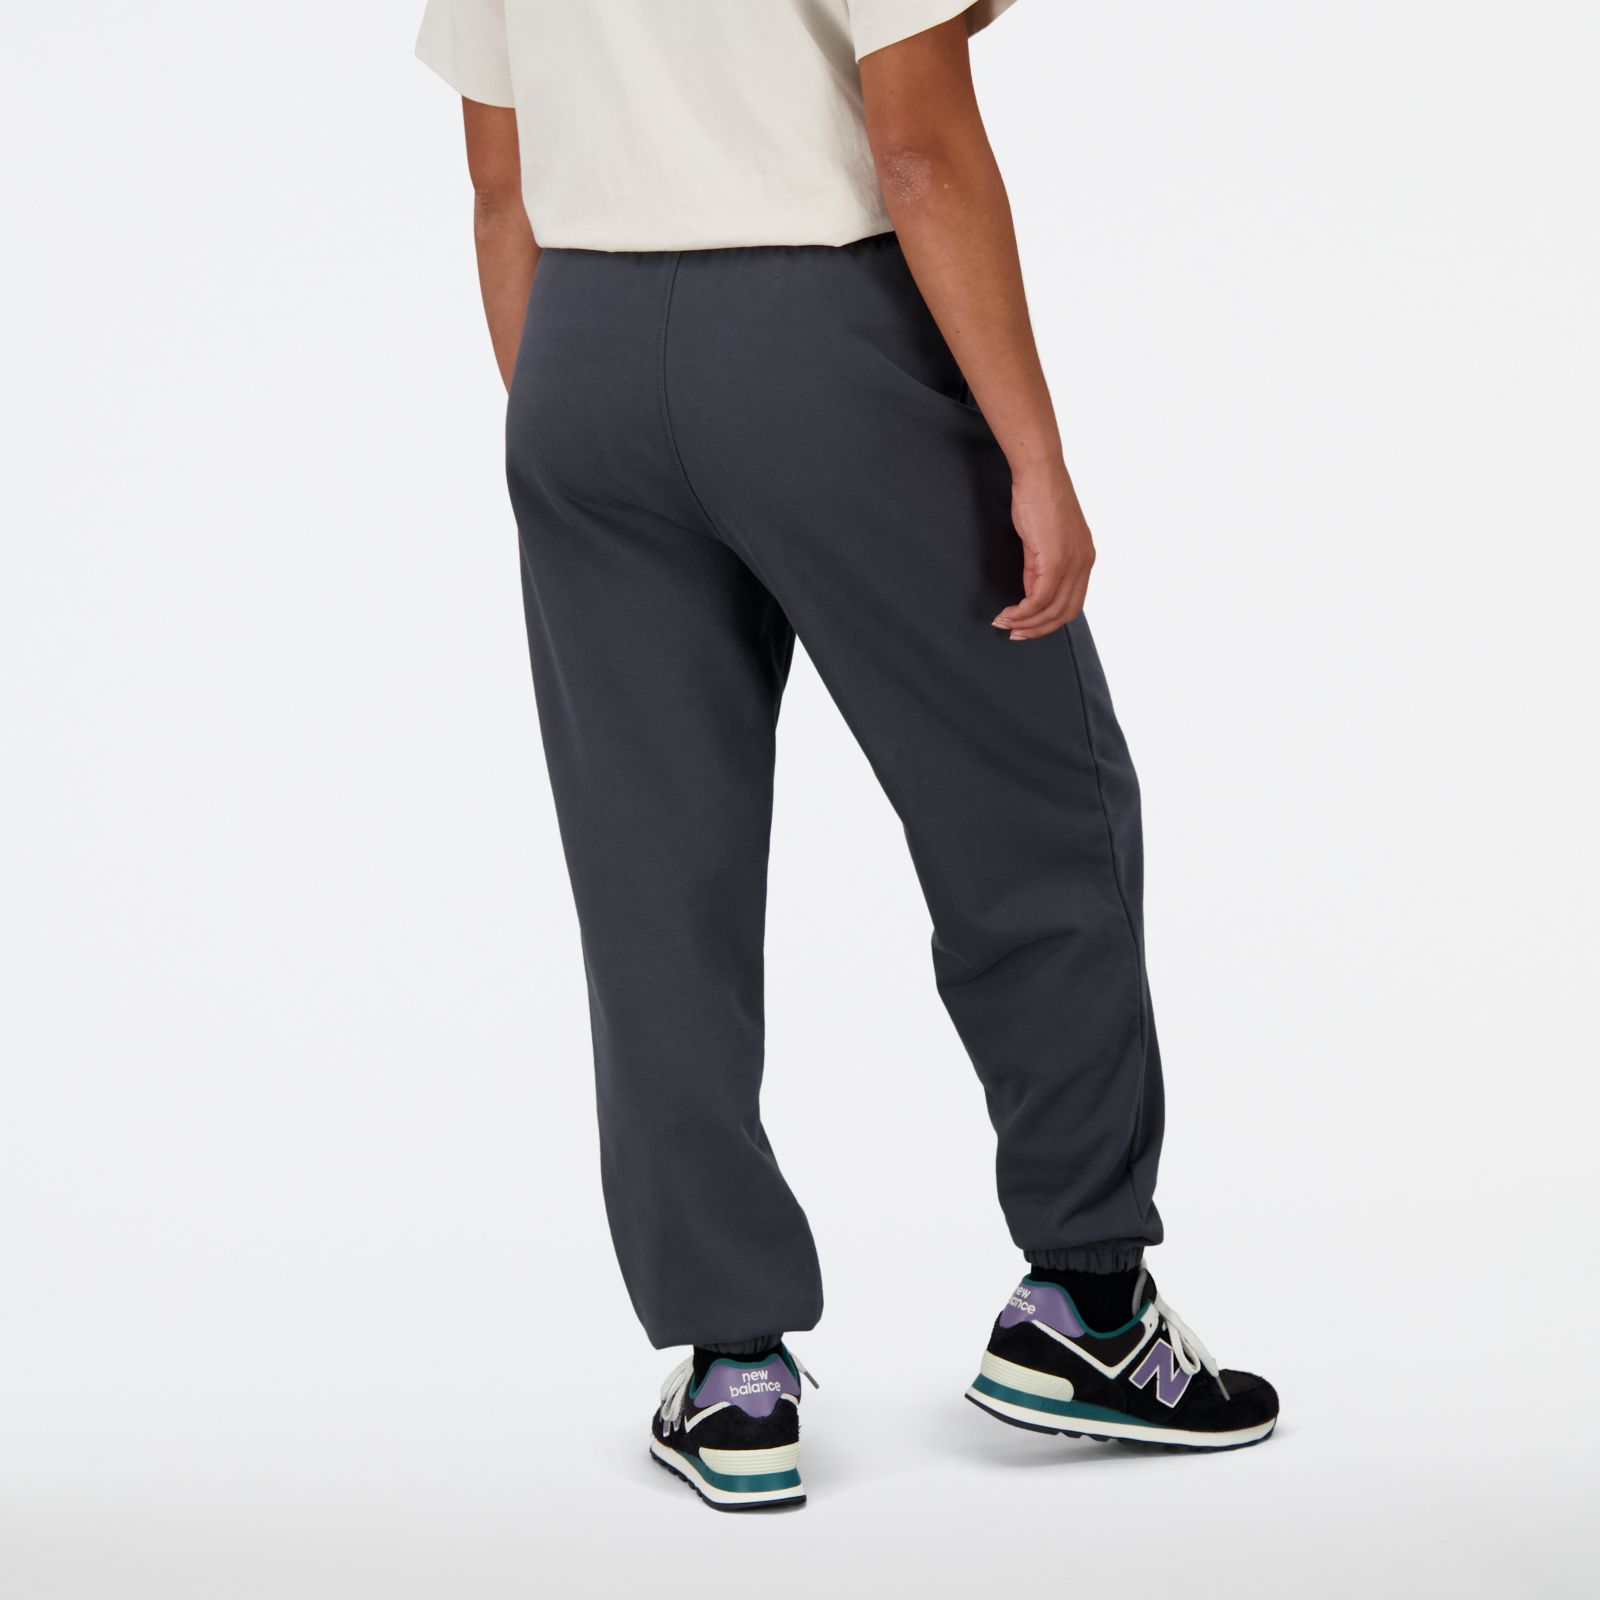 Women's Athletics Remastered French Terry Pant Apparel - New Balance